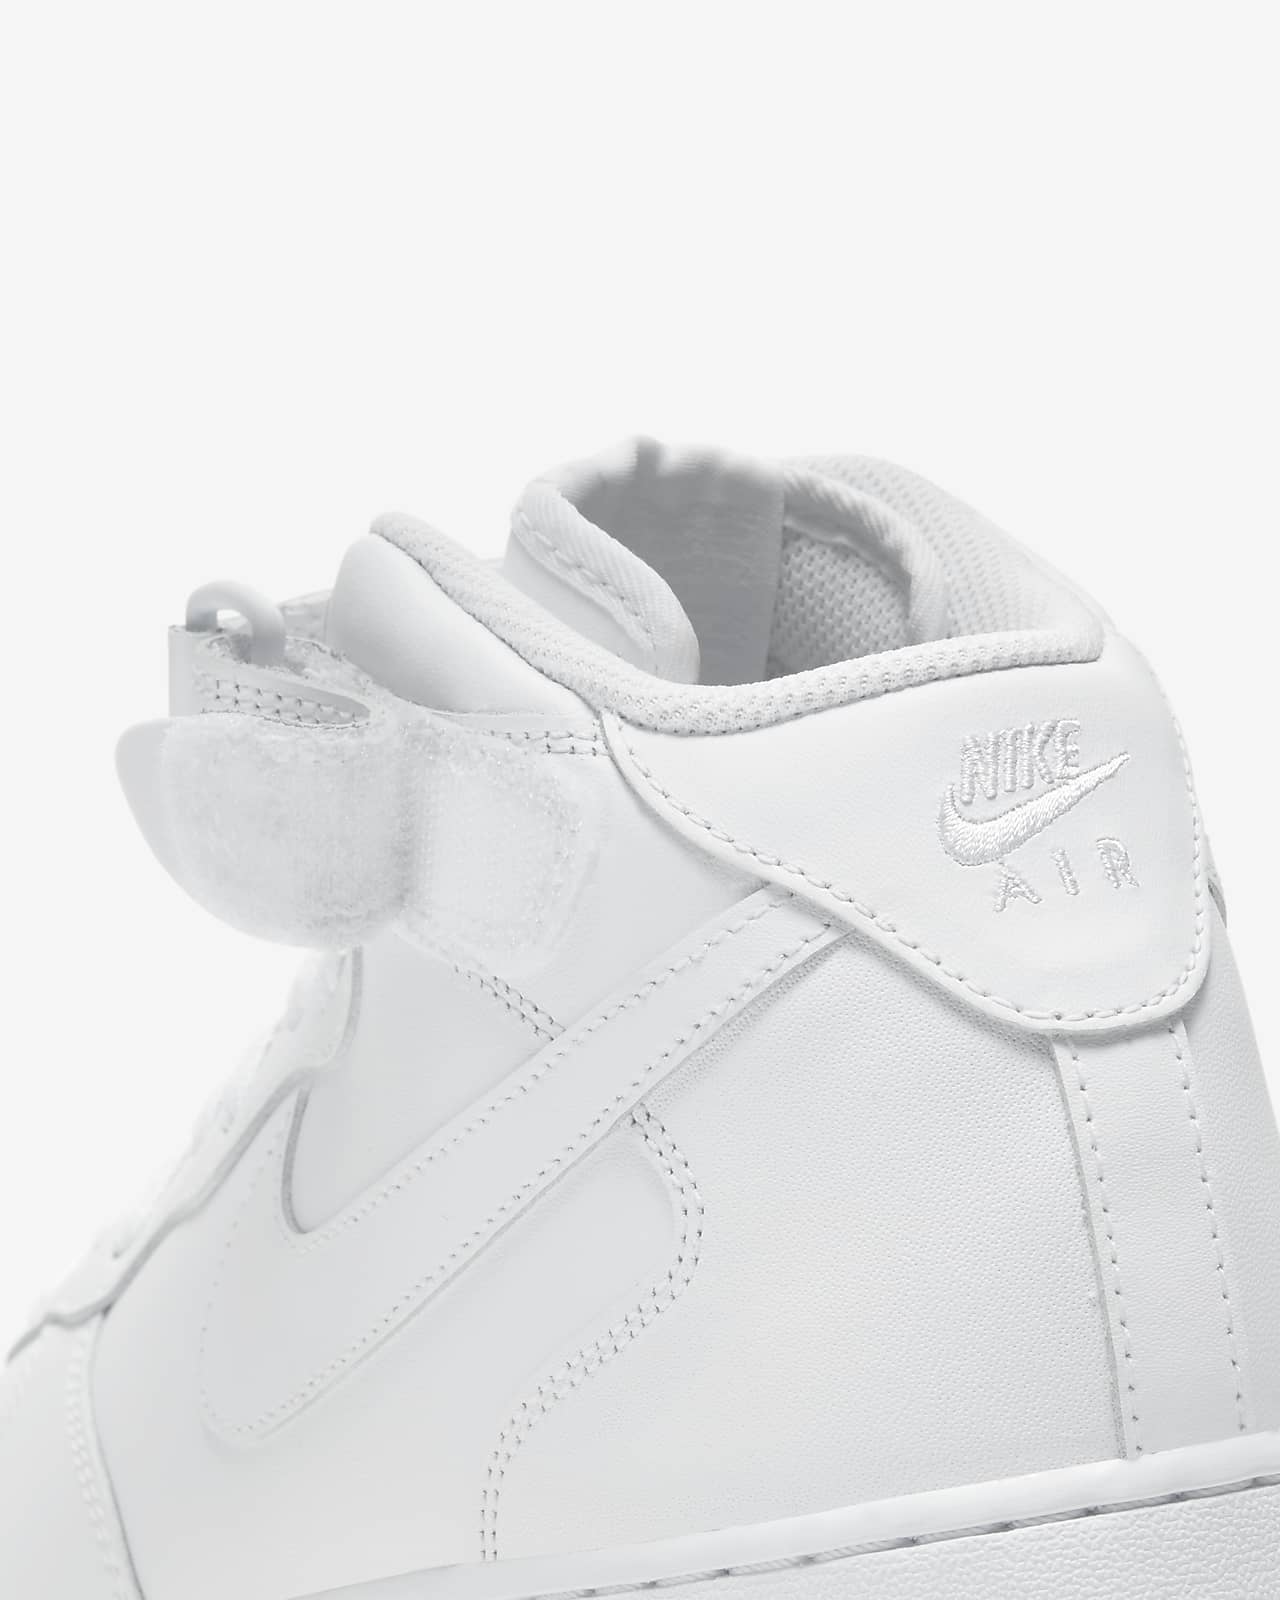 nike air force 1 07 mid women's white